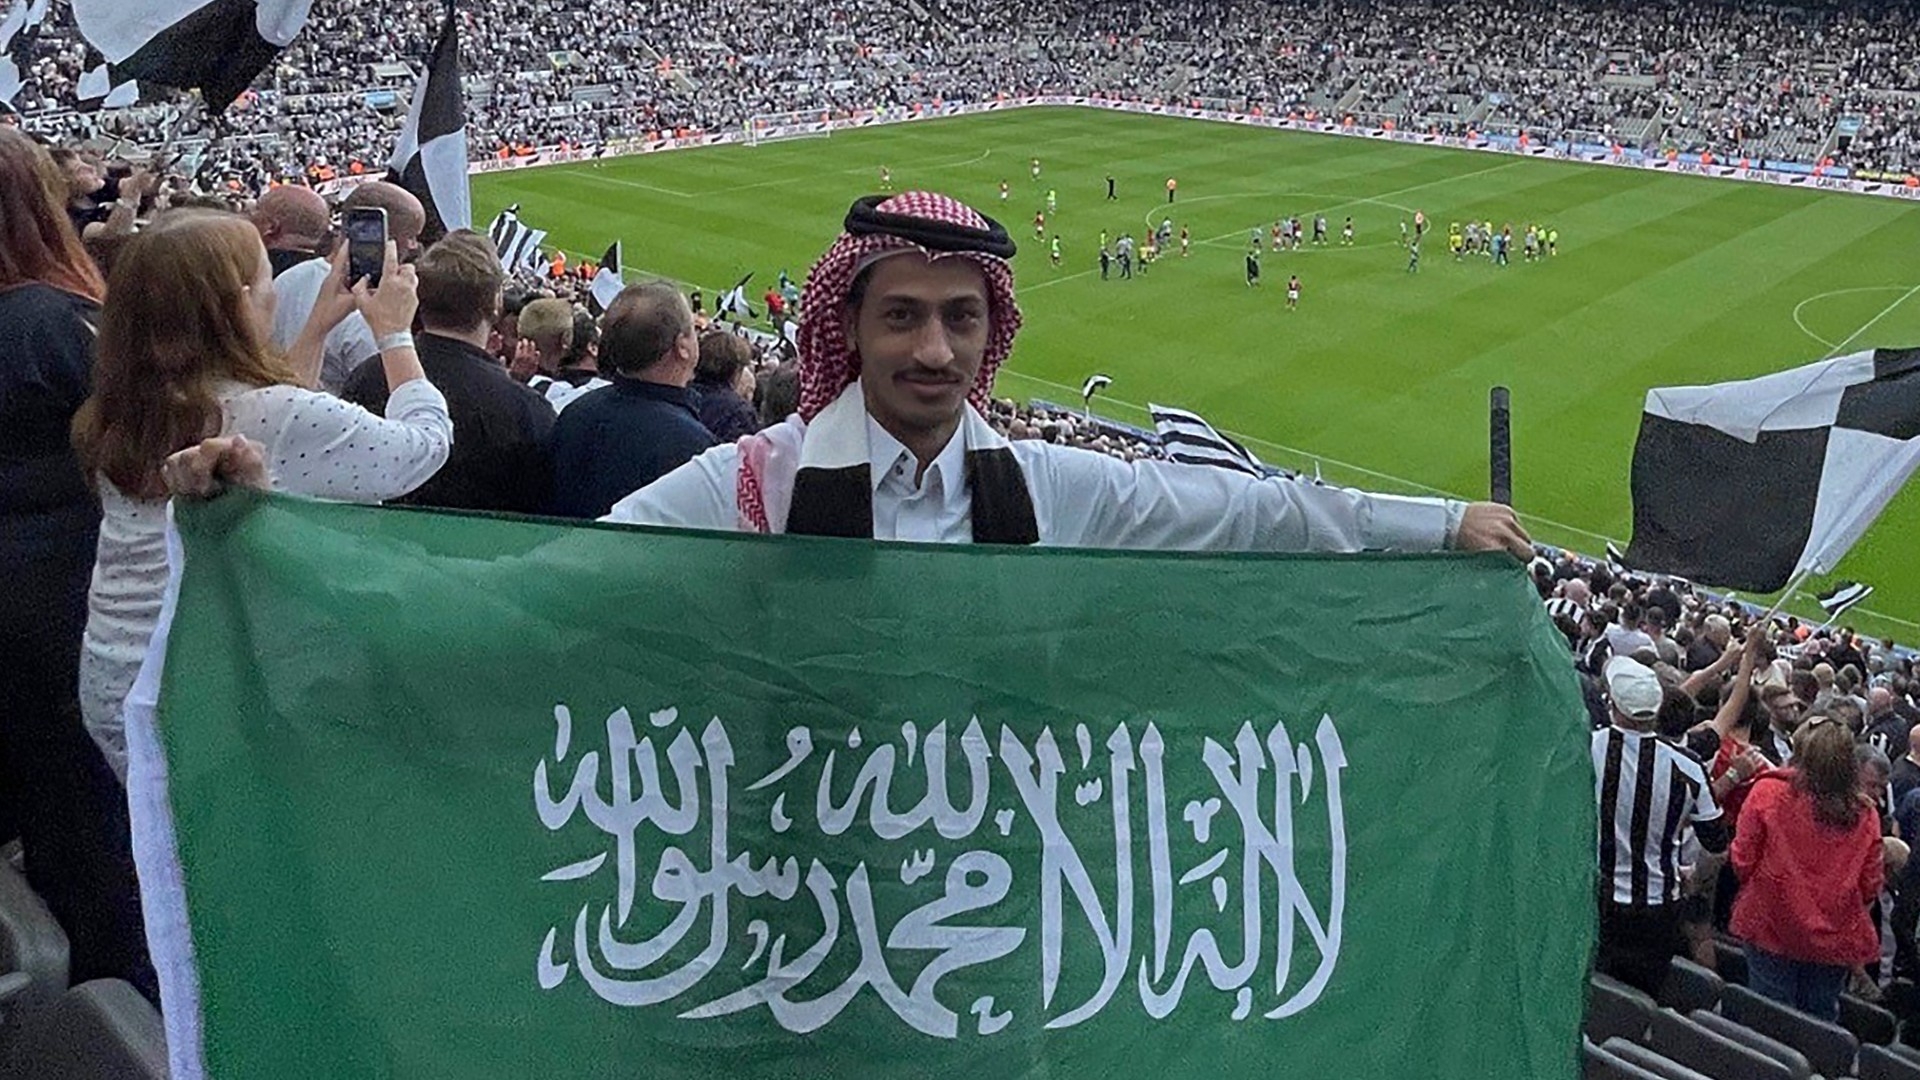 A Saudi Arabian fan carries the national flag during a Premier League football match at St James' Park in Newcastle-upon-Tyne on 6 August 2022 (AFP) 